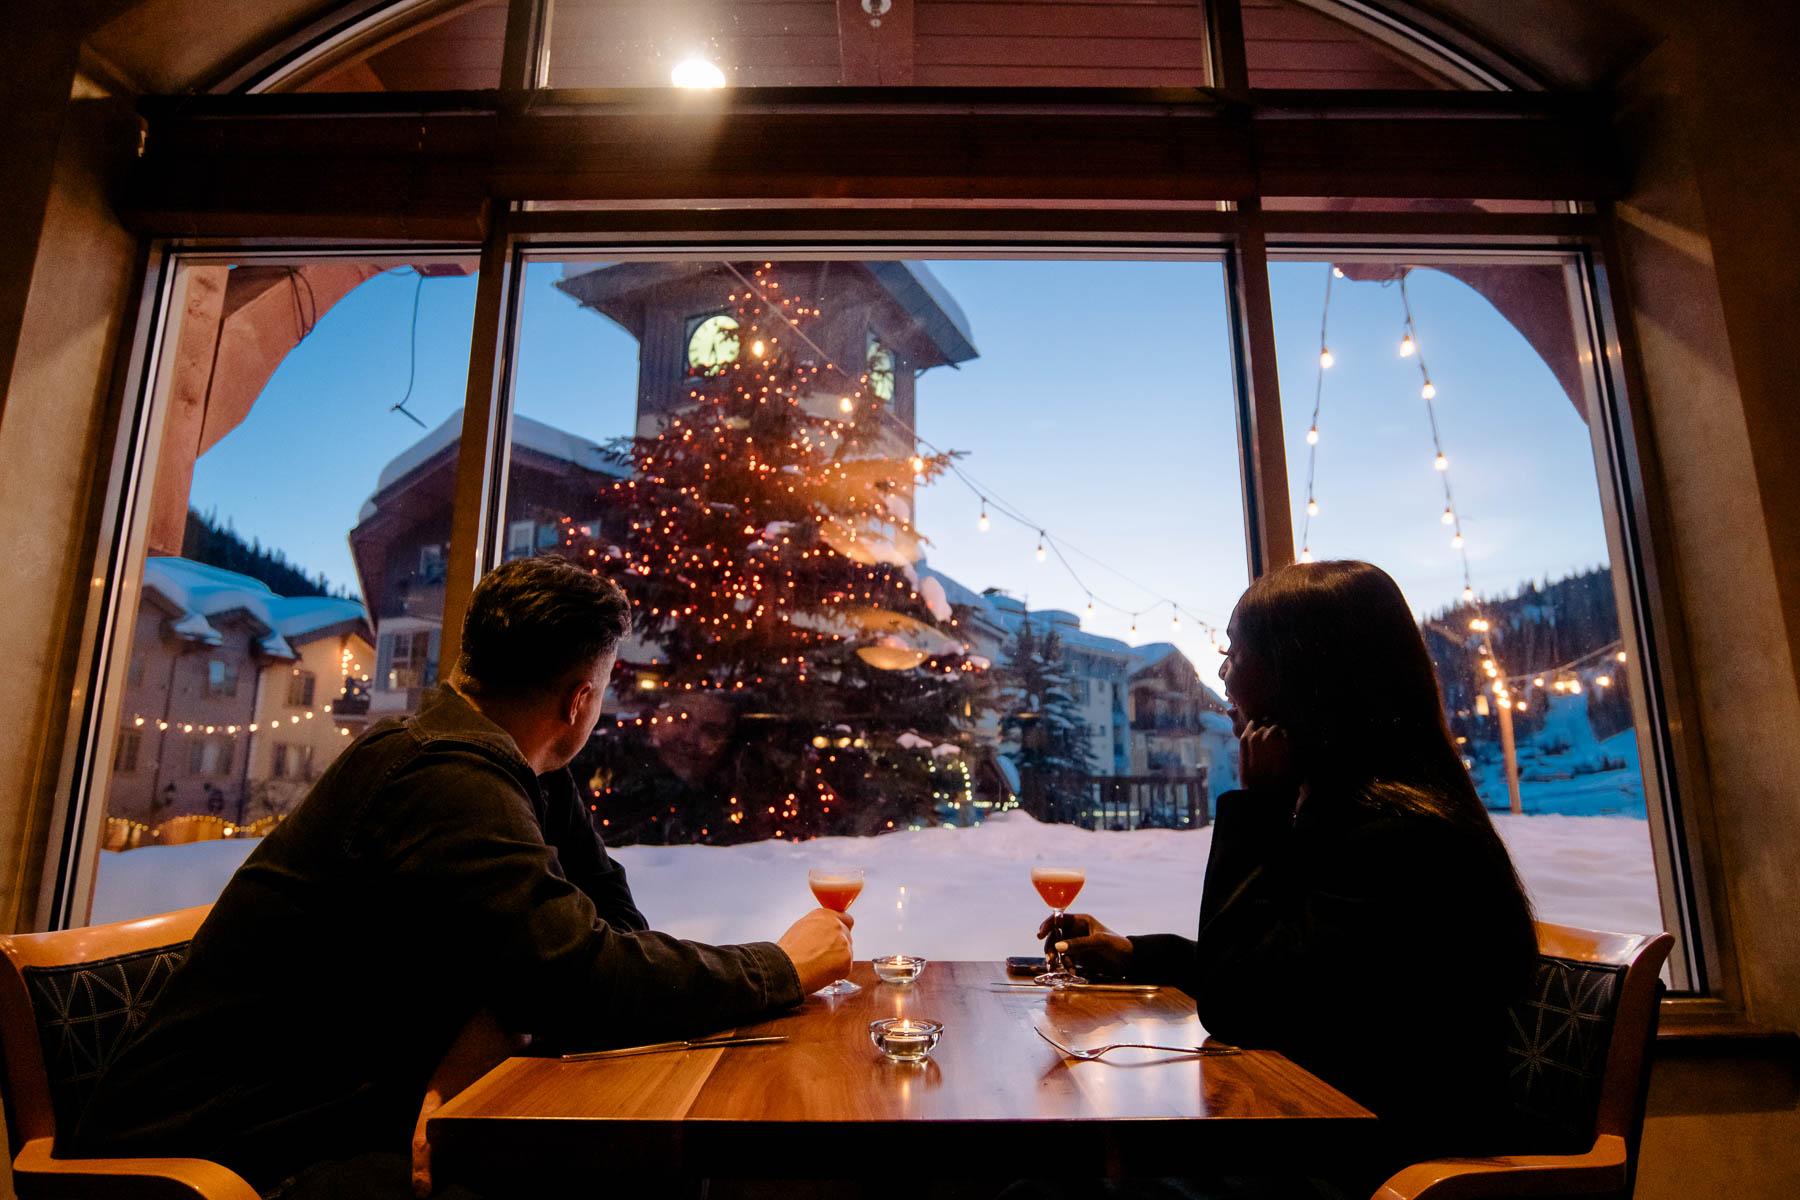 Two people staring out a window while sitting at a dining table having drinks